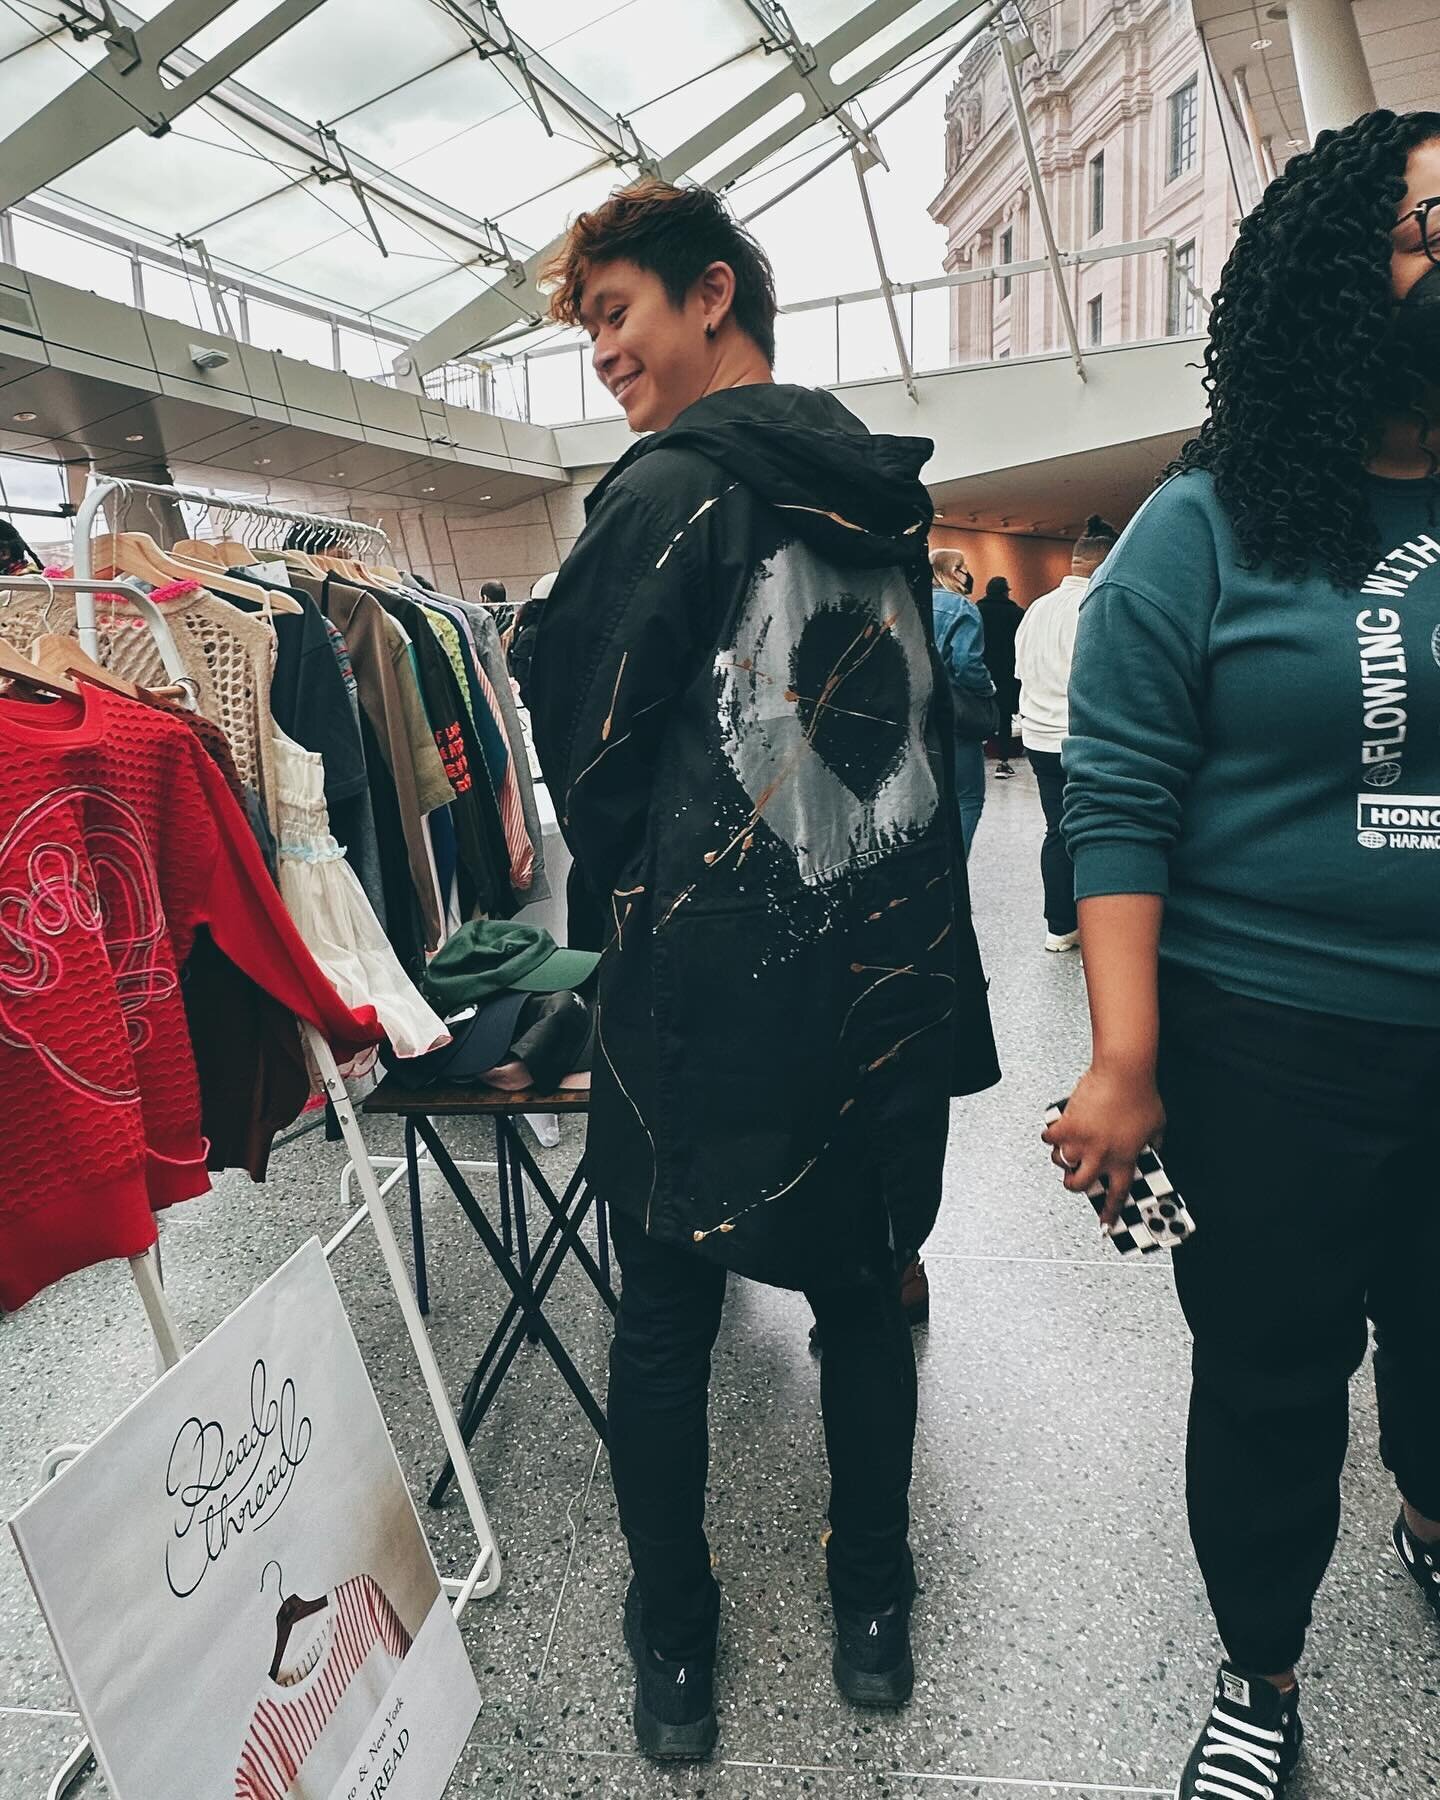 Yesterday&rsquo;s our first Pop-up in the U.S. was a success! Thank you all for coming and meet the clothes my sister @readthread and I&rsquo;ve created! Next stop is &ldquo;Fort Greene Artisan Bazaar&rdquo; on 3/23! Looking forward to seeing you all